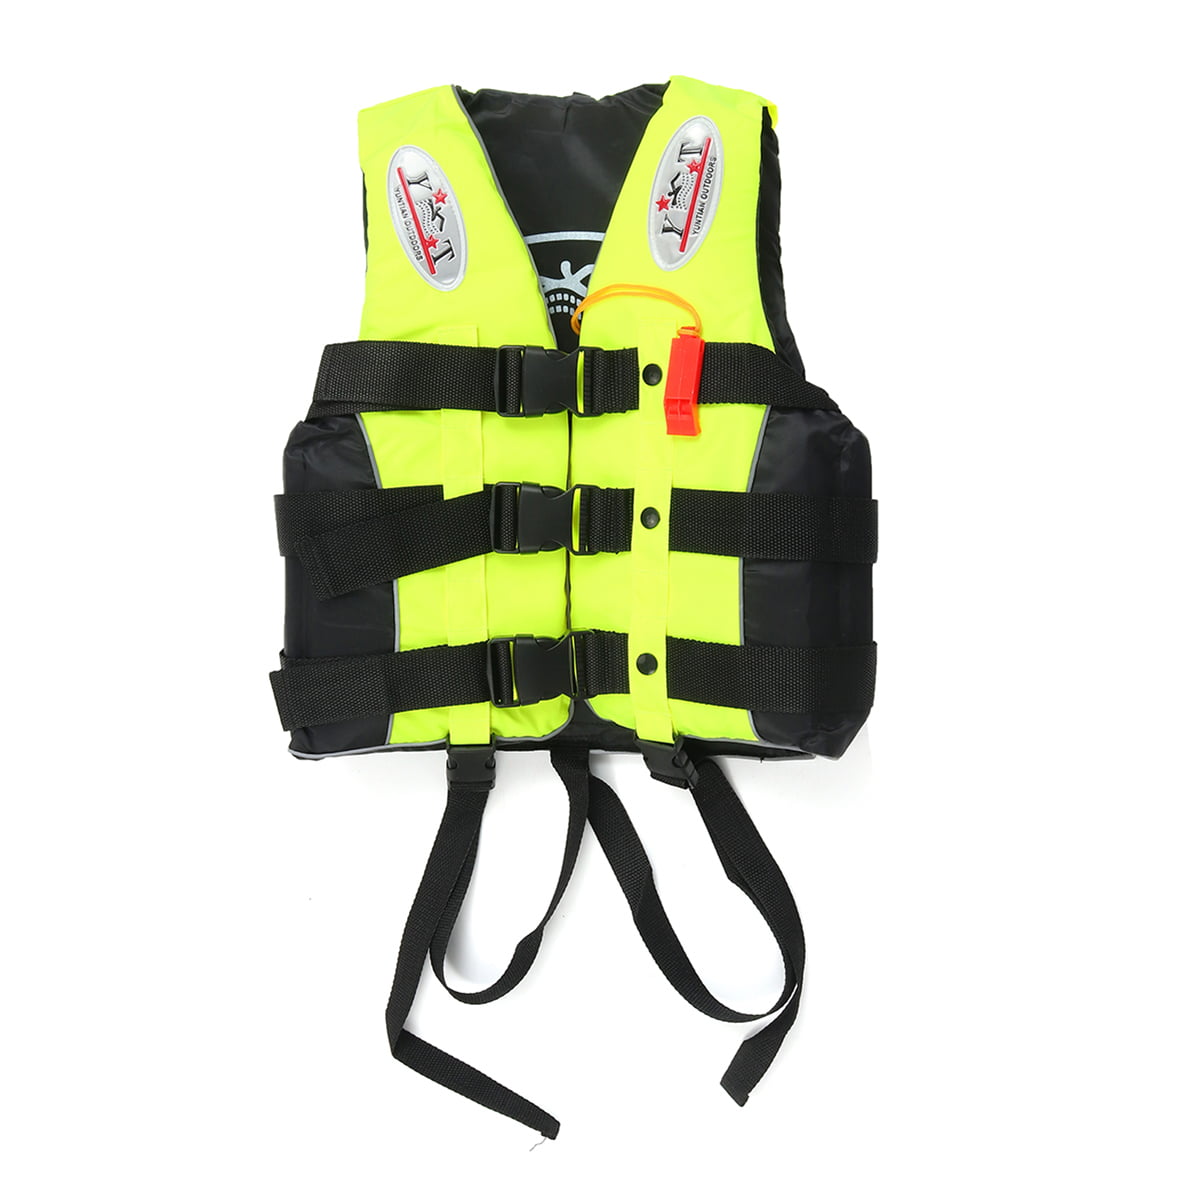 Aid Life Jacket Surfing Boating Drifting Water Sport Buoyancy Kayak Safety Vest 